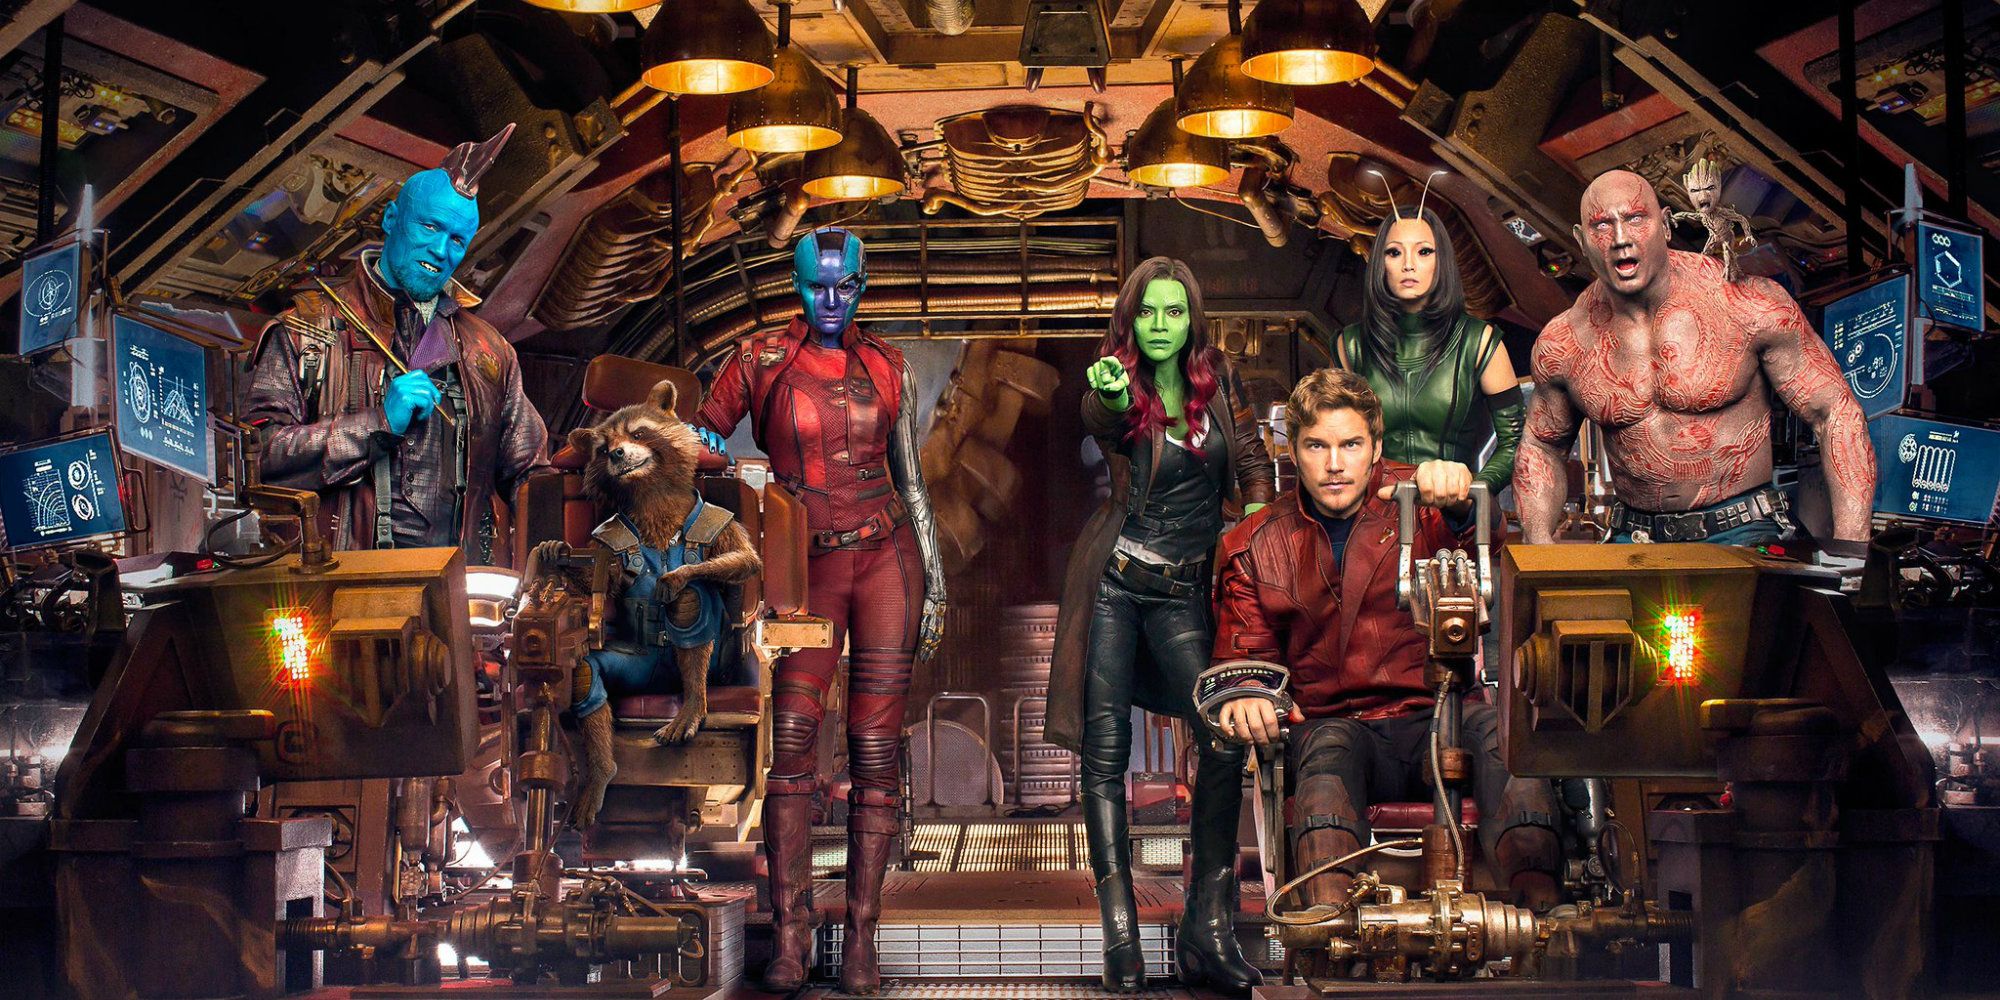 10 Reasons Rocket Should Lead The Guardians Of The Galaxy